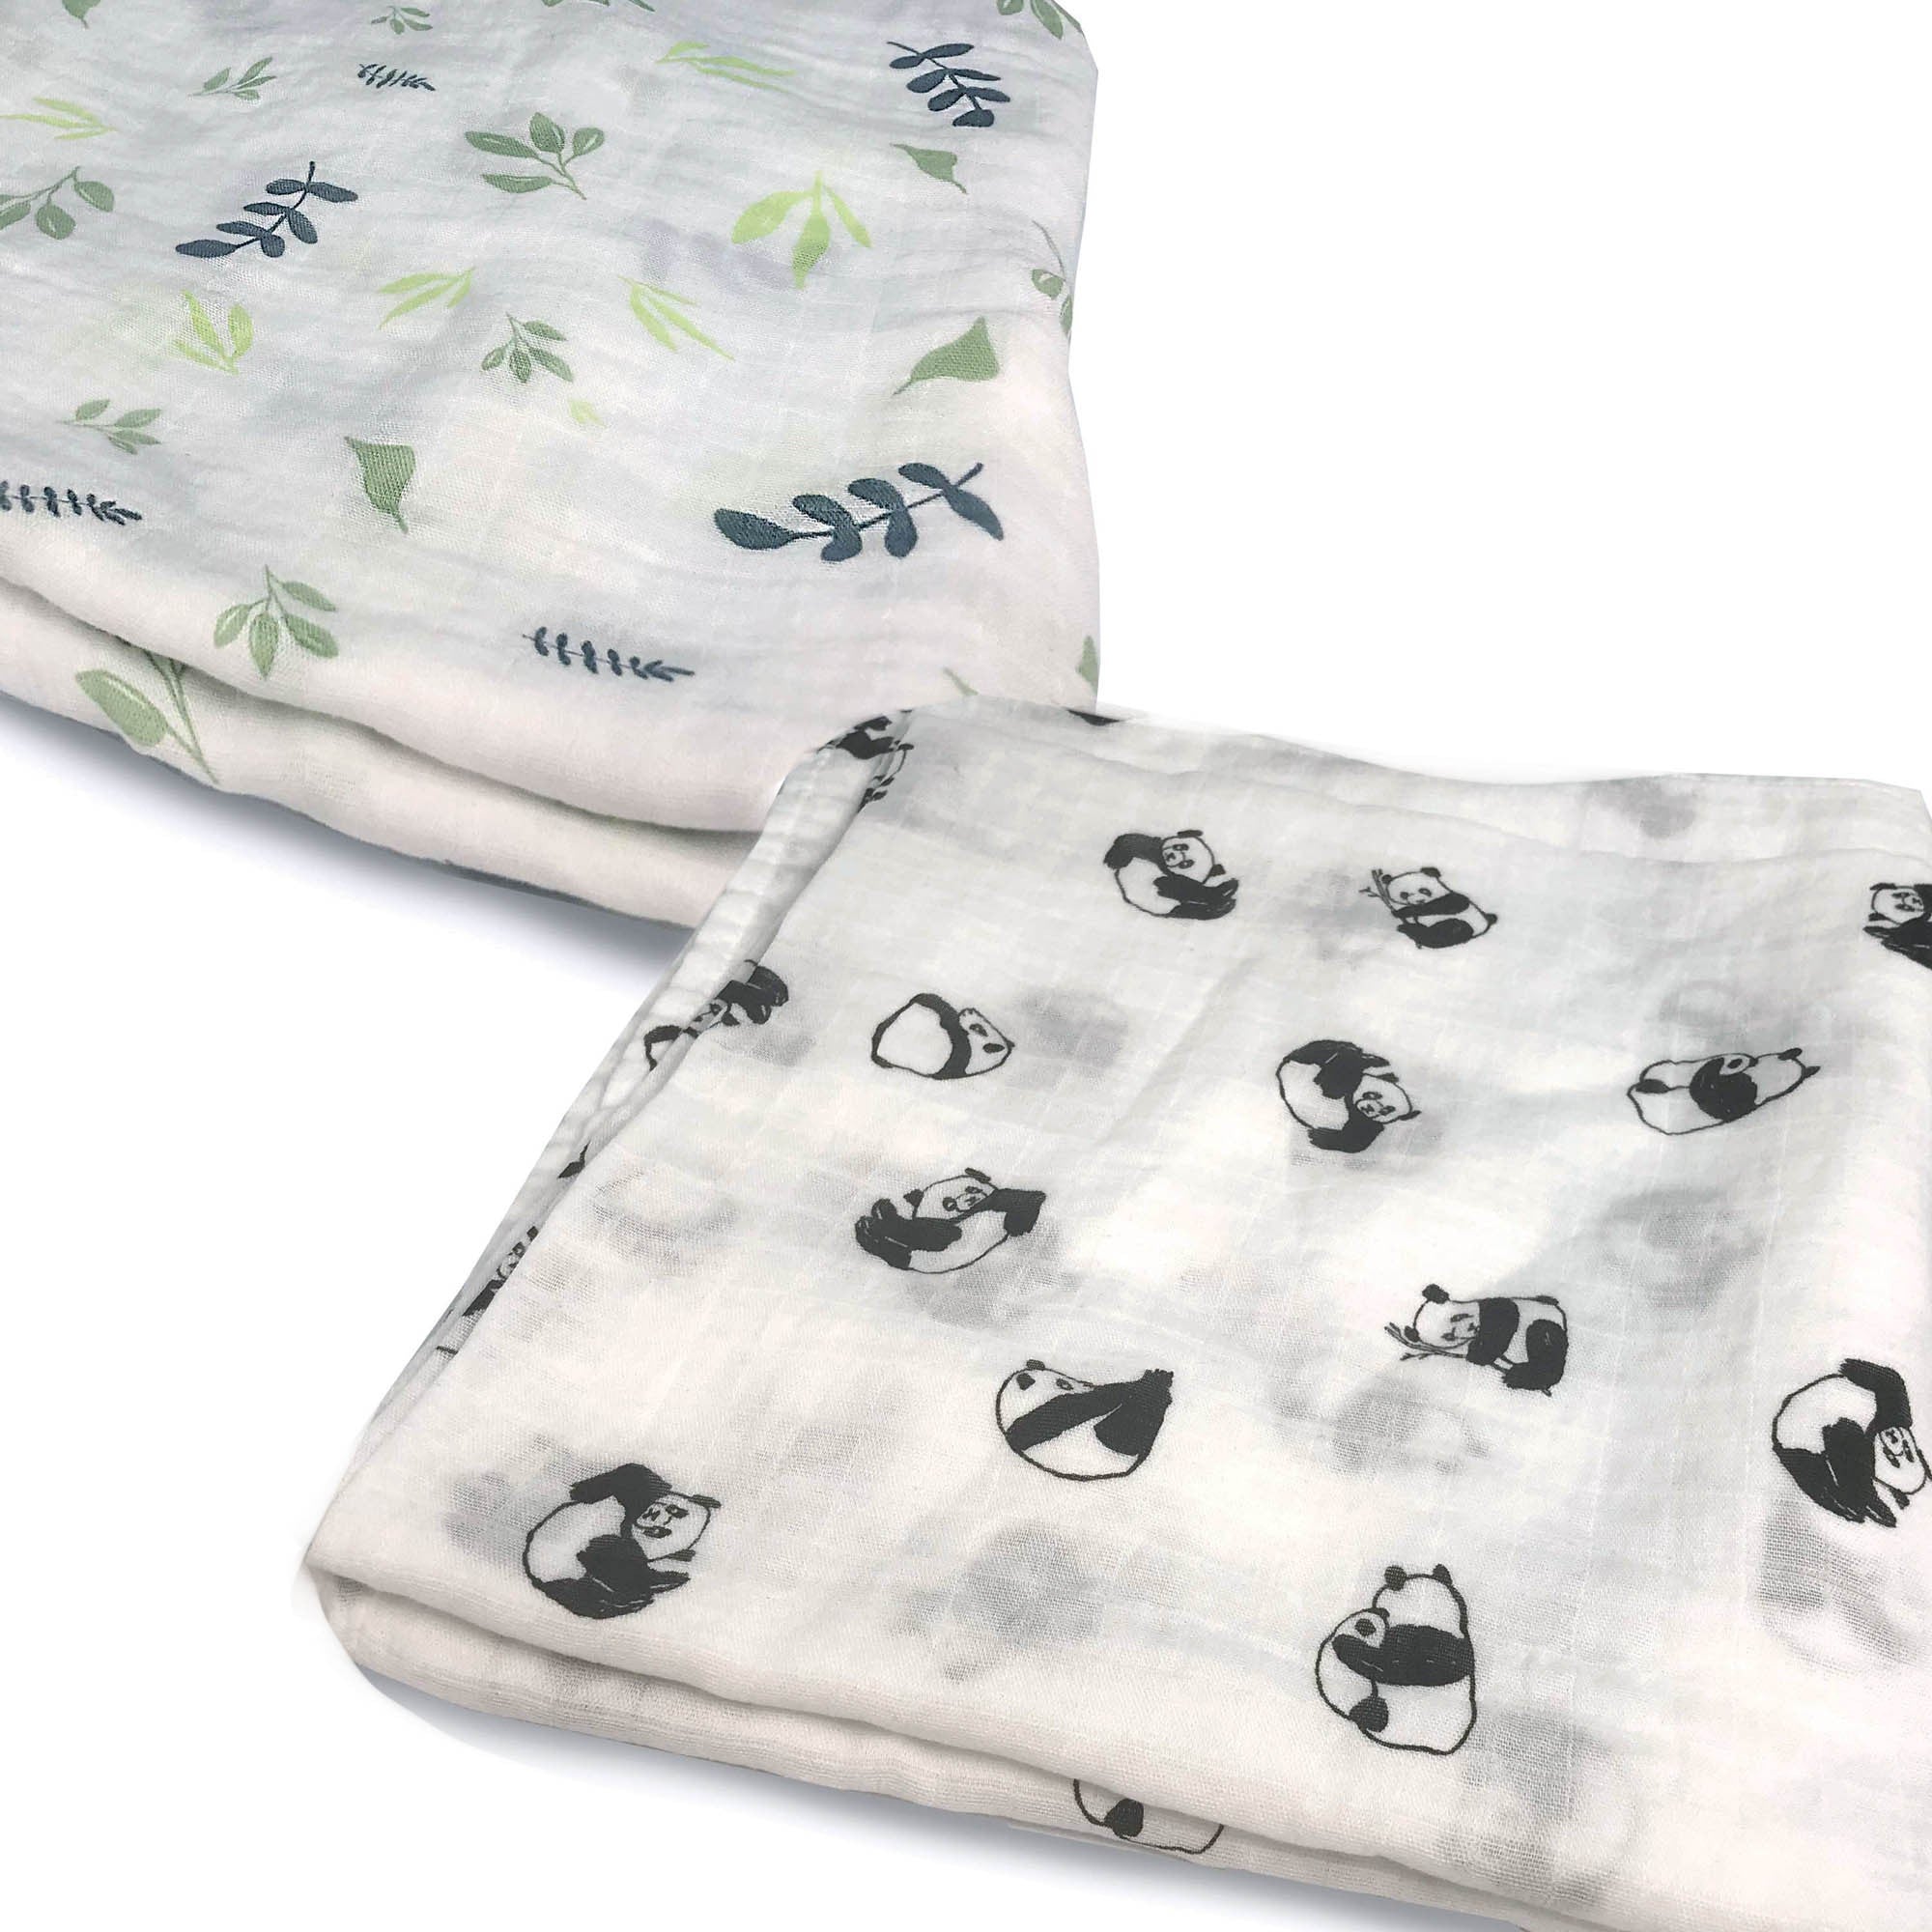 BAMBOO Muslin Swaddle - Silky-Soft, Hypoallergenic and Breathable, Baby Feel Secure - Organically made from Bamboo - Panda